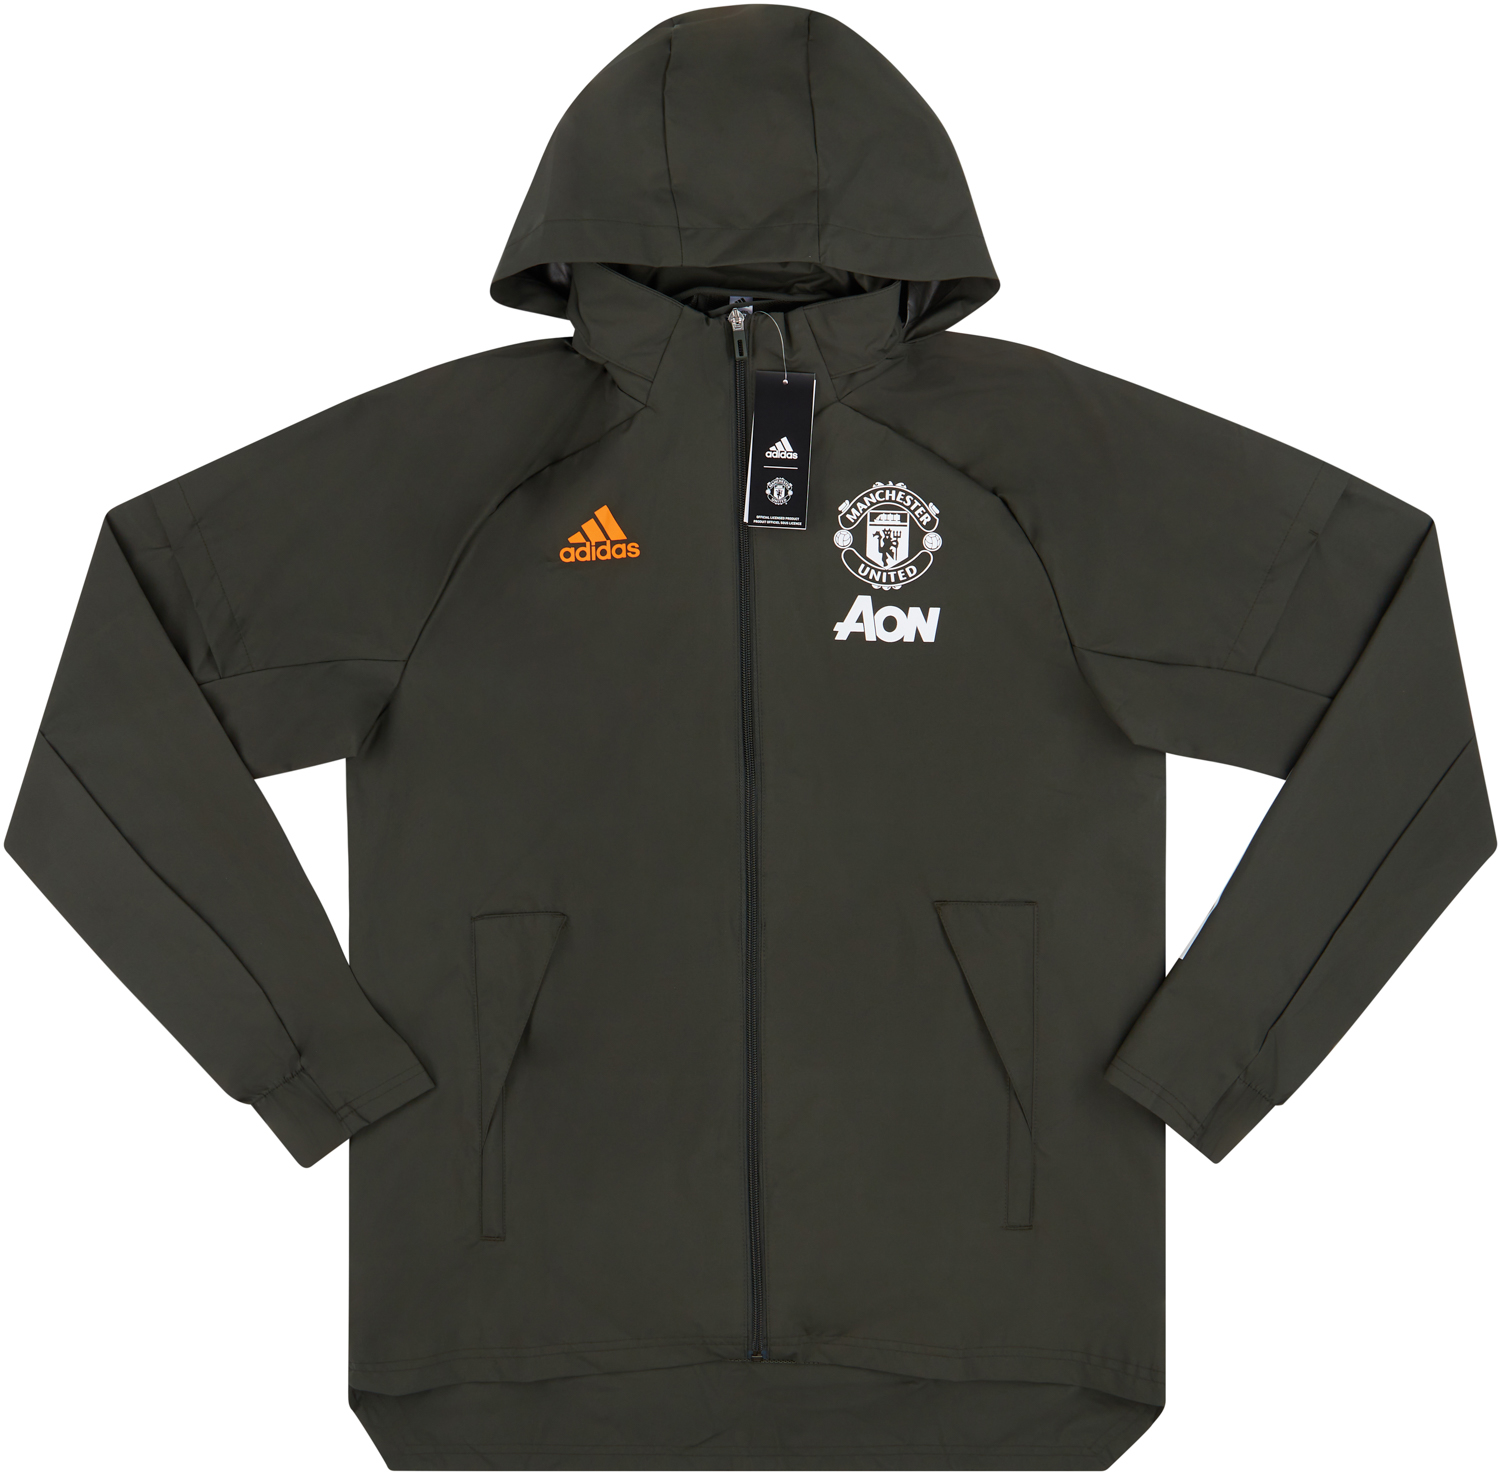 2020-21 Manchester United adidas All-Weather Jacket